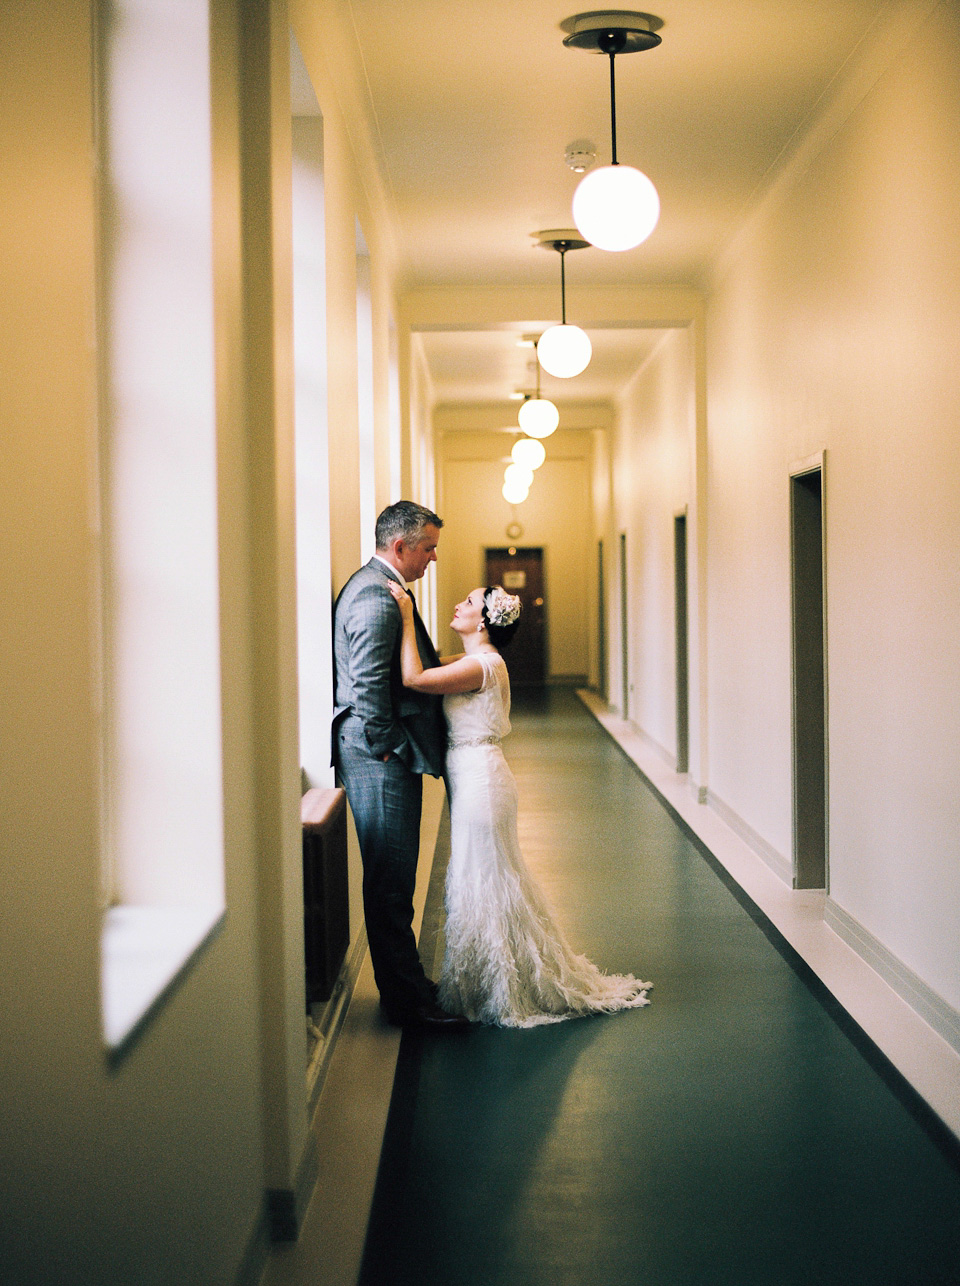 A 1930's Art Deco inspired wedding at The Assembly Rooms in London. Images shot on 35mm film by Peachey Photography.